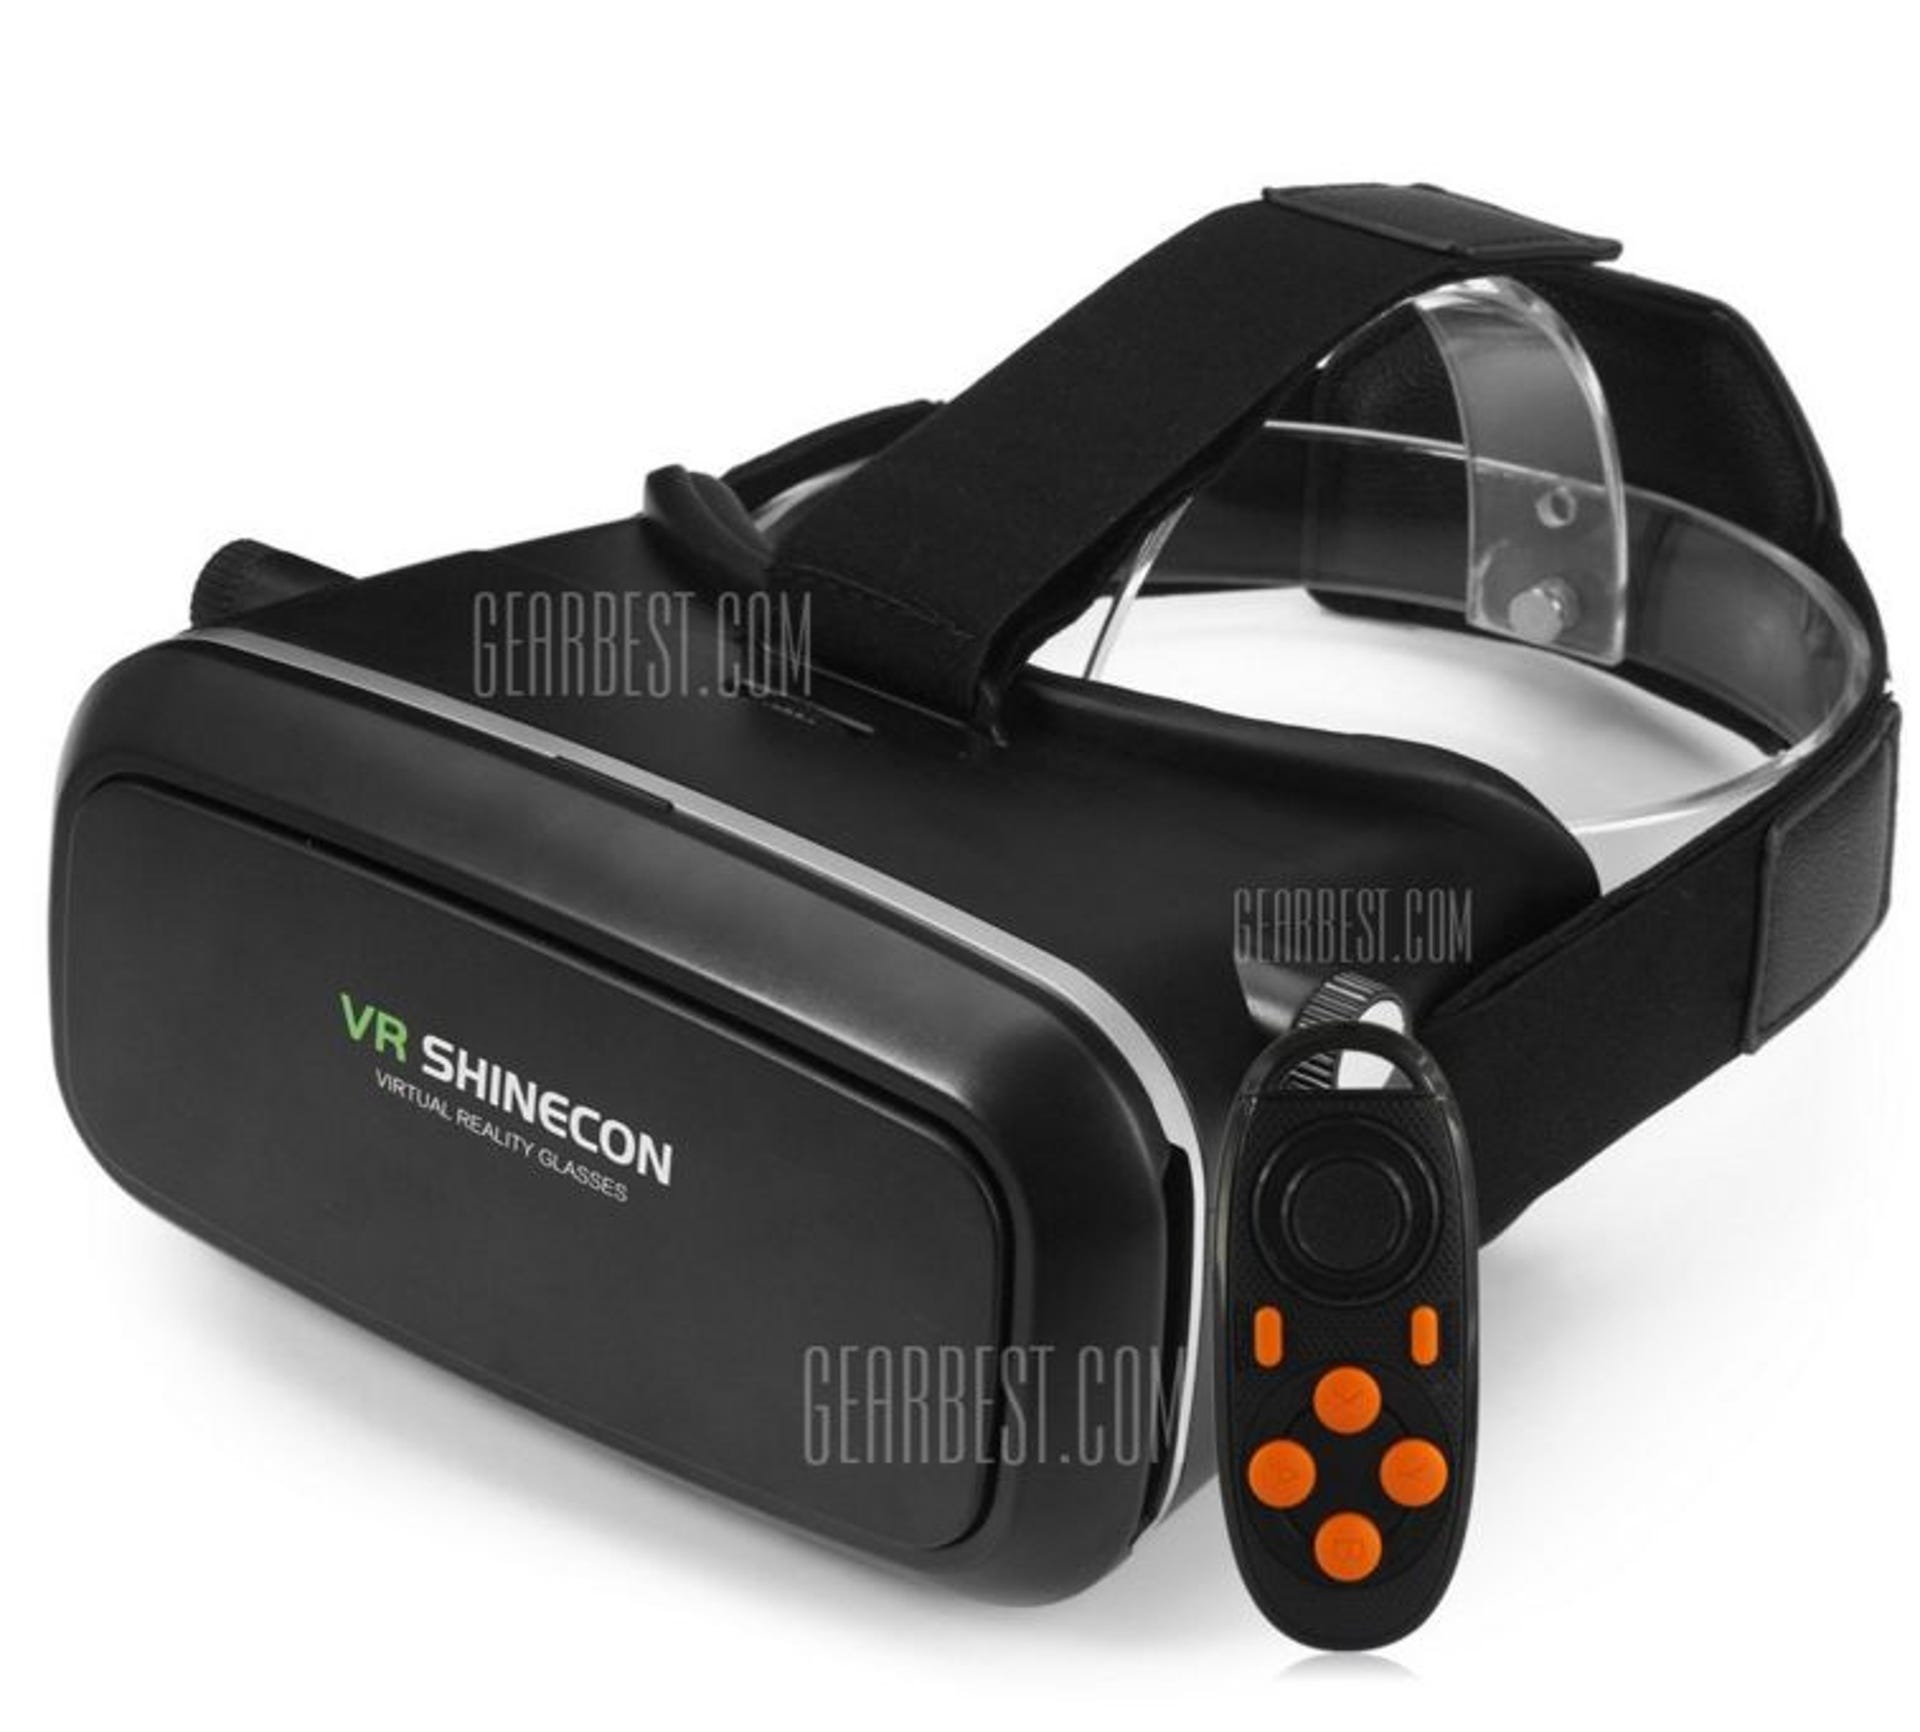 vr-shinecon-3d-headset-with-remote.jpg